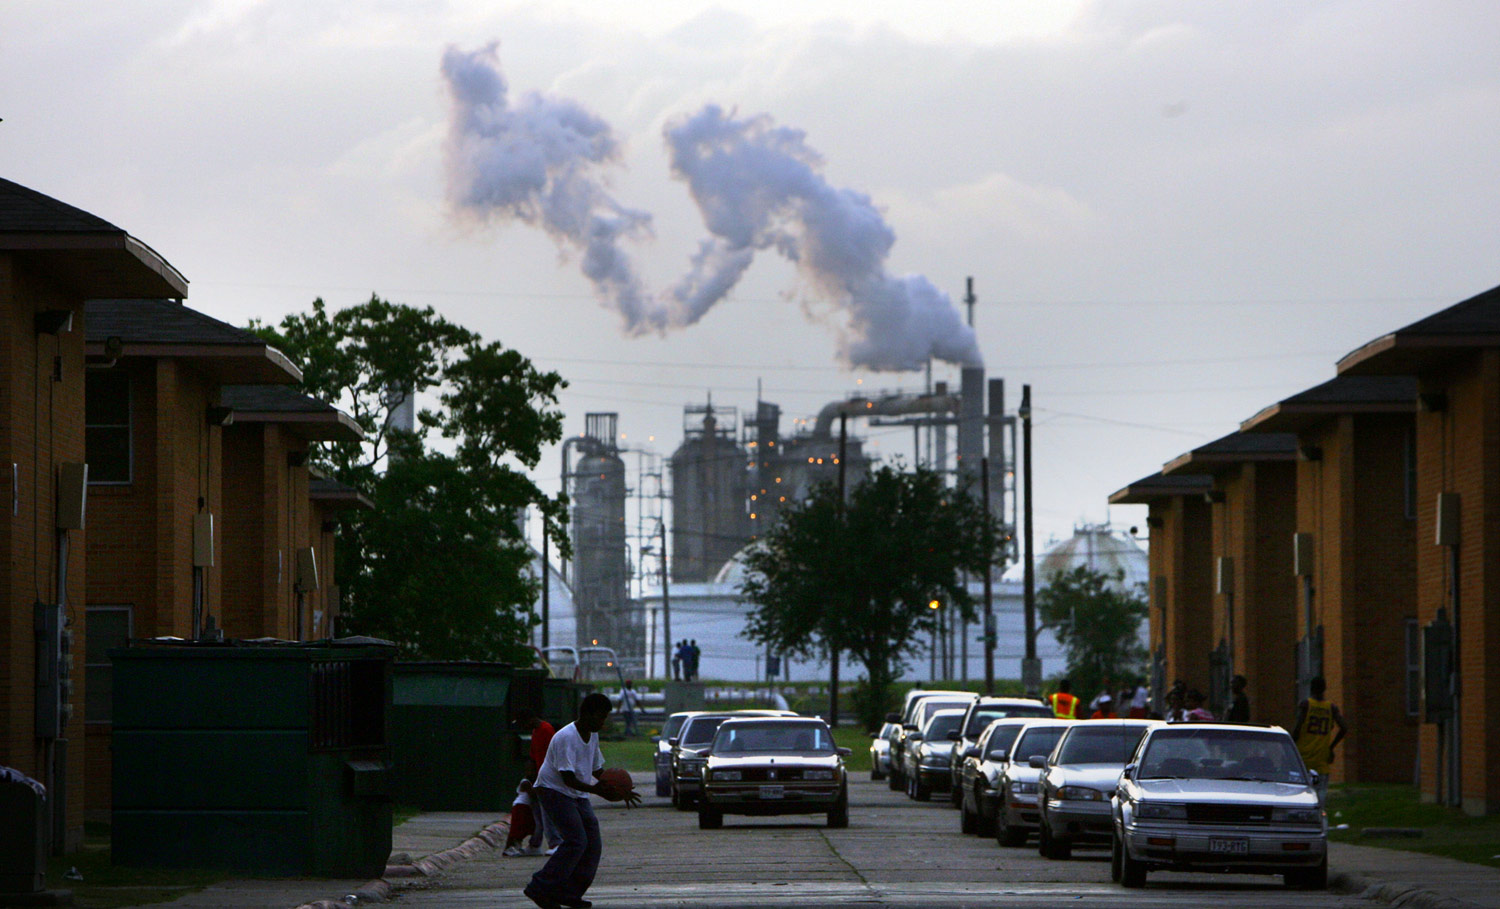 Welcome to West Port Arthur, Texas, Ground Zero in the Fight for Climate Justice